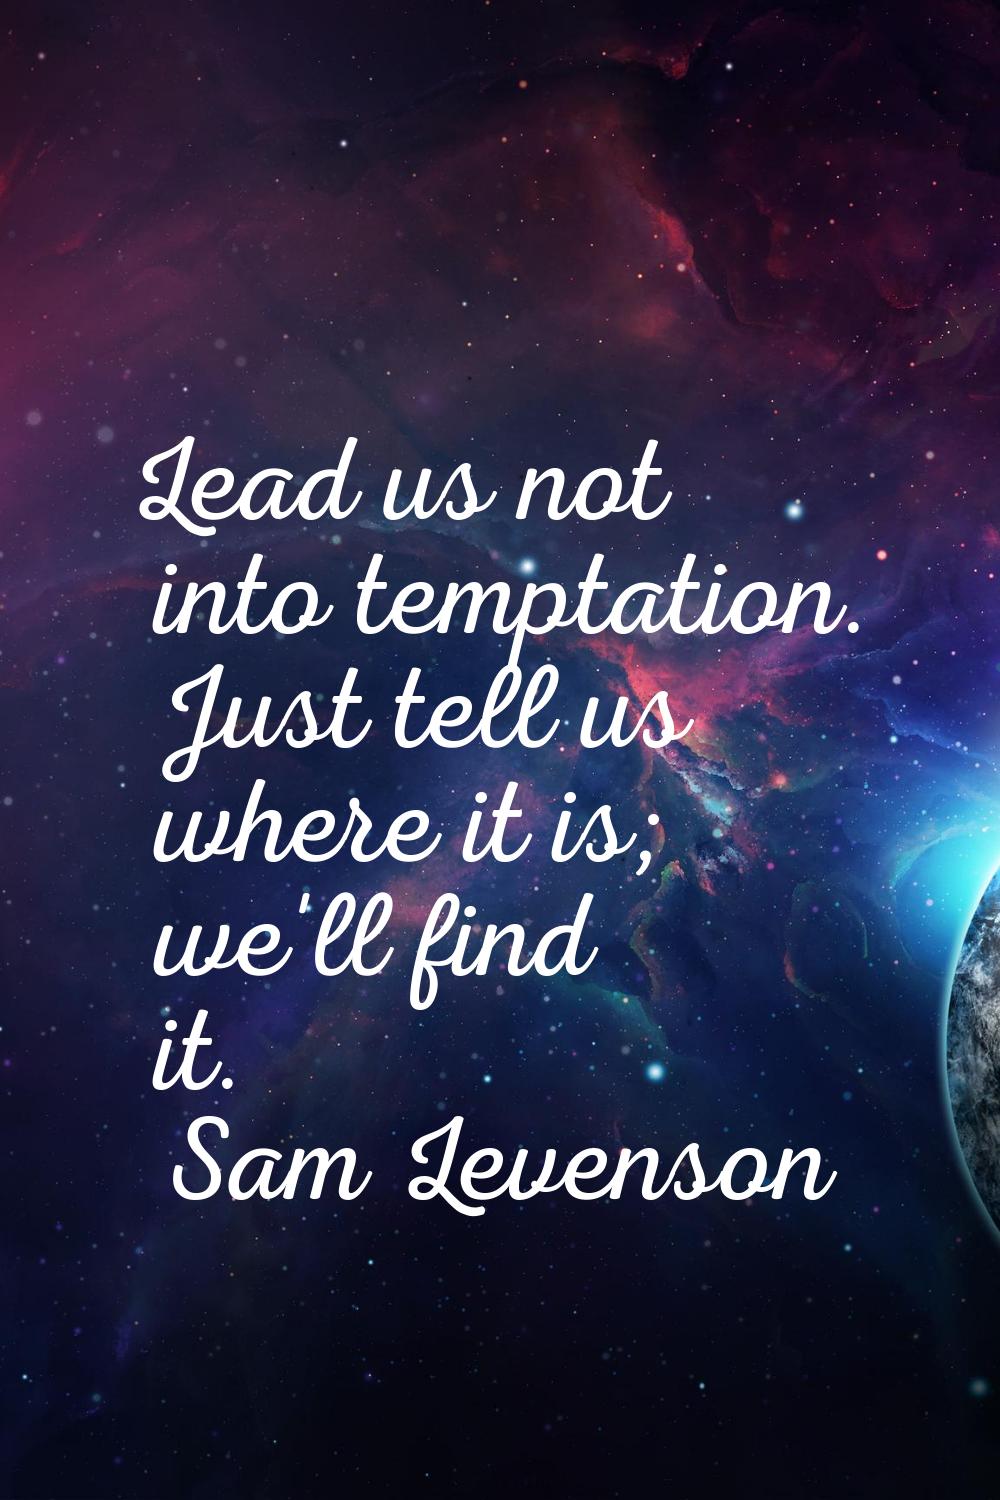 Lead us not into temptation. Just tell us where it is; we'll find it.